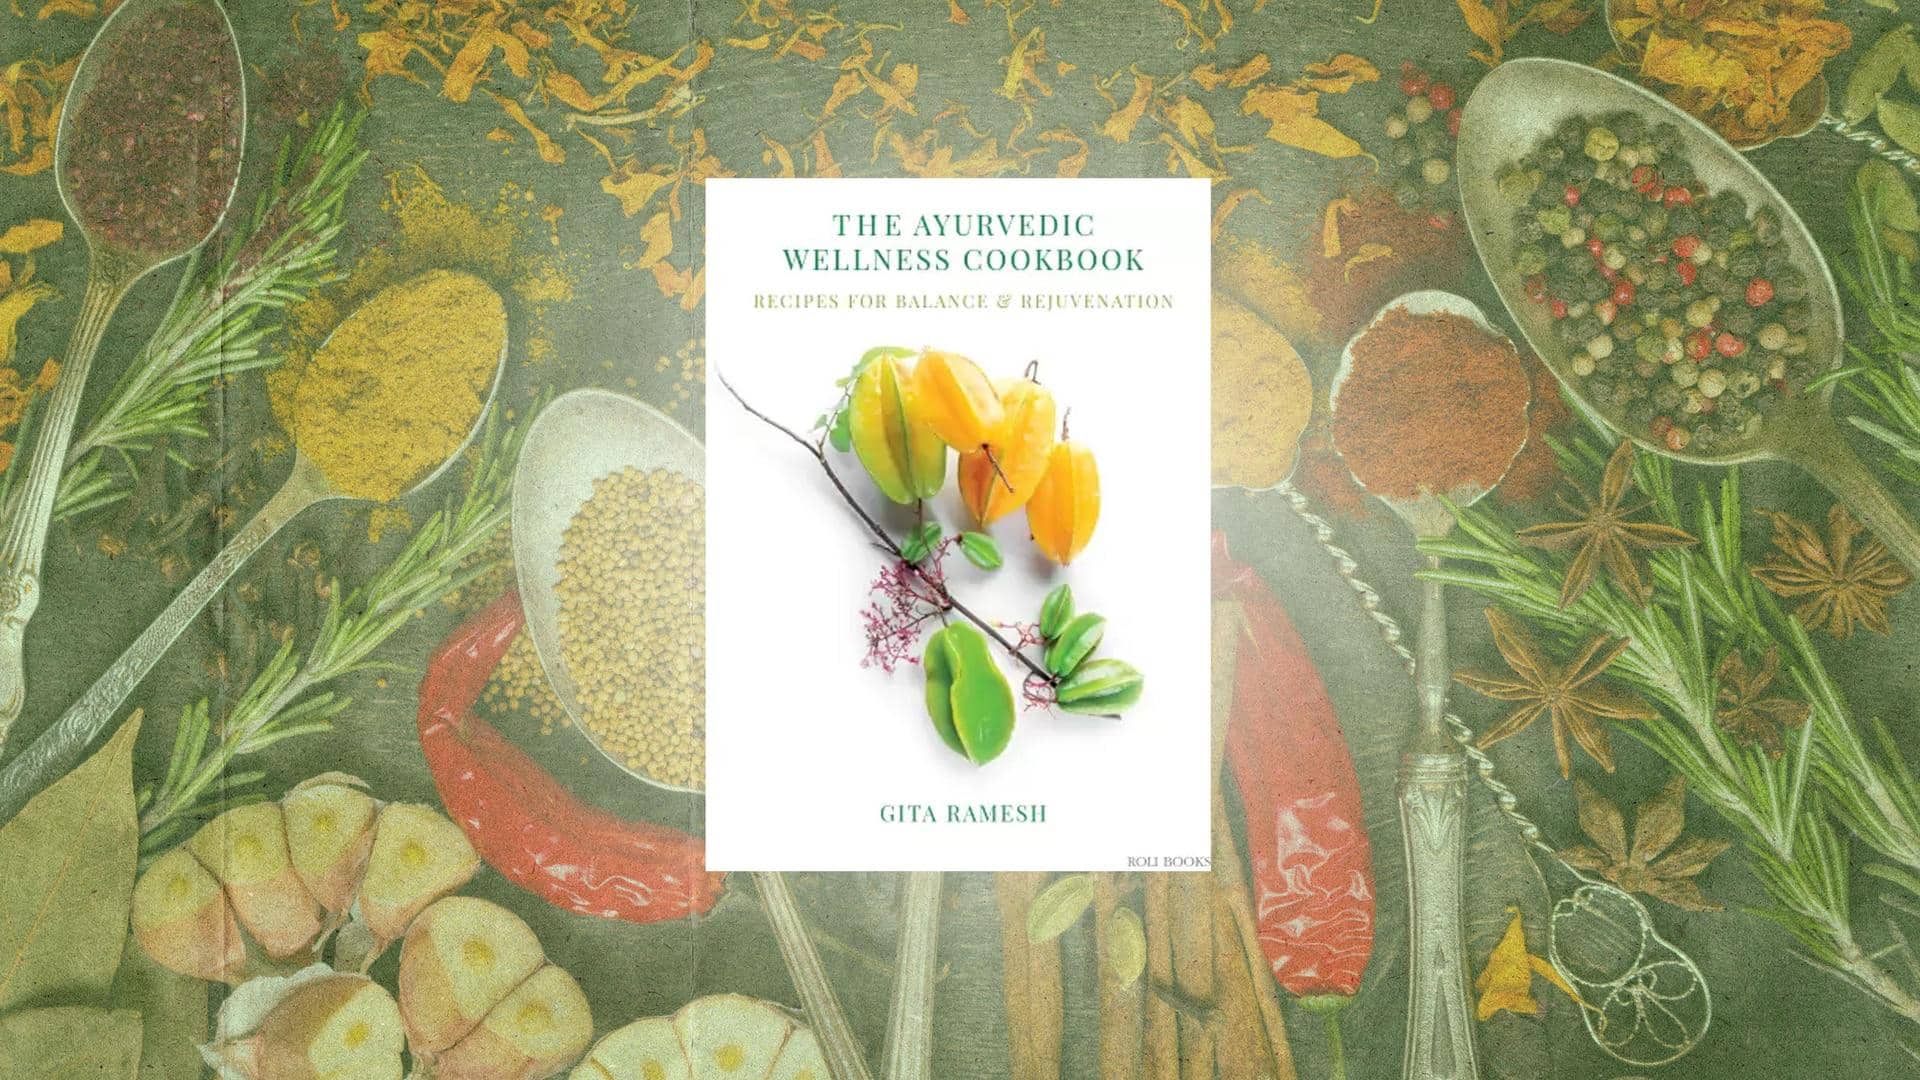 Book review: Revitalize your health with 'The Ayurvedic Wellness Cookbook'